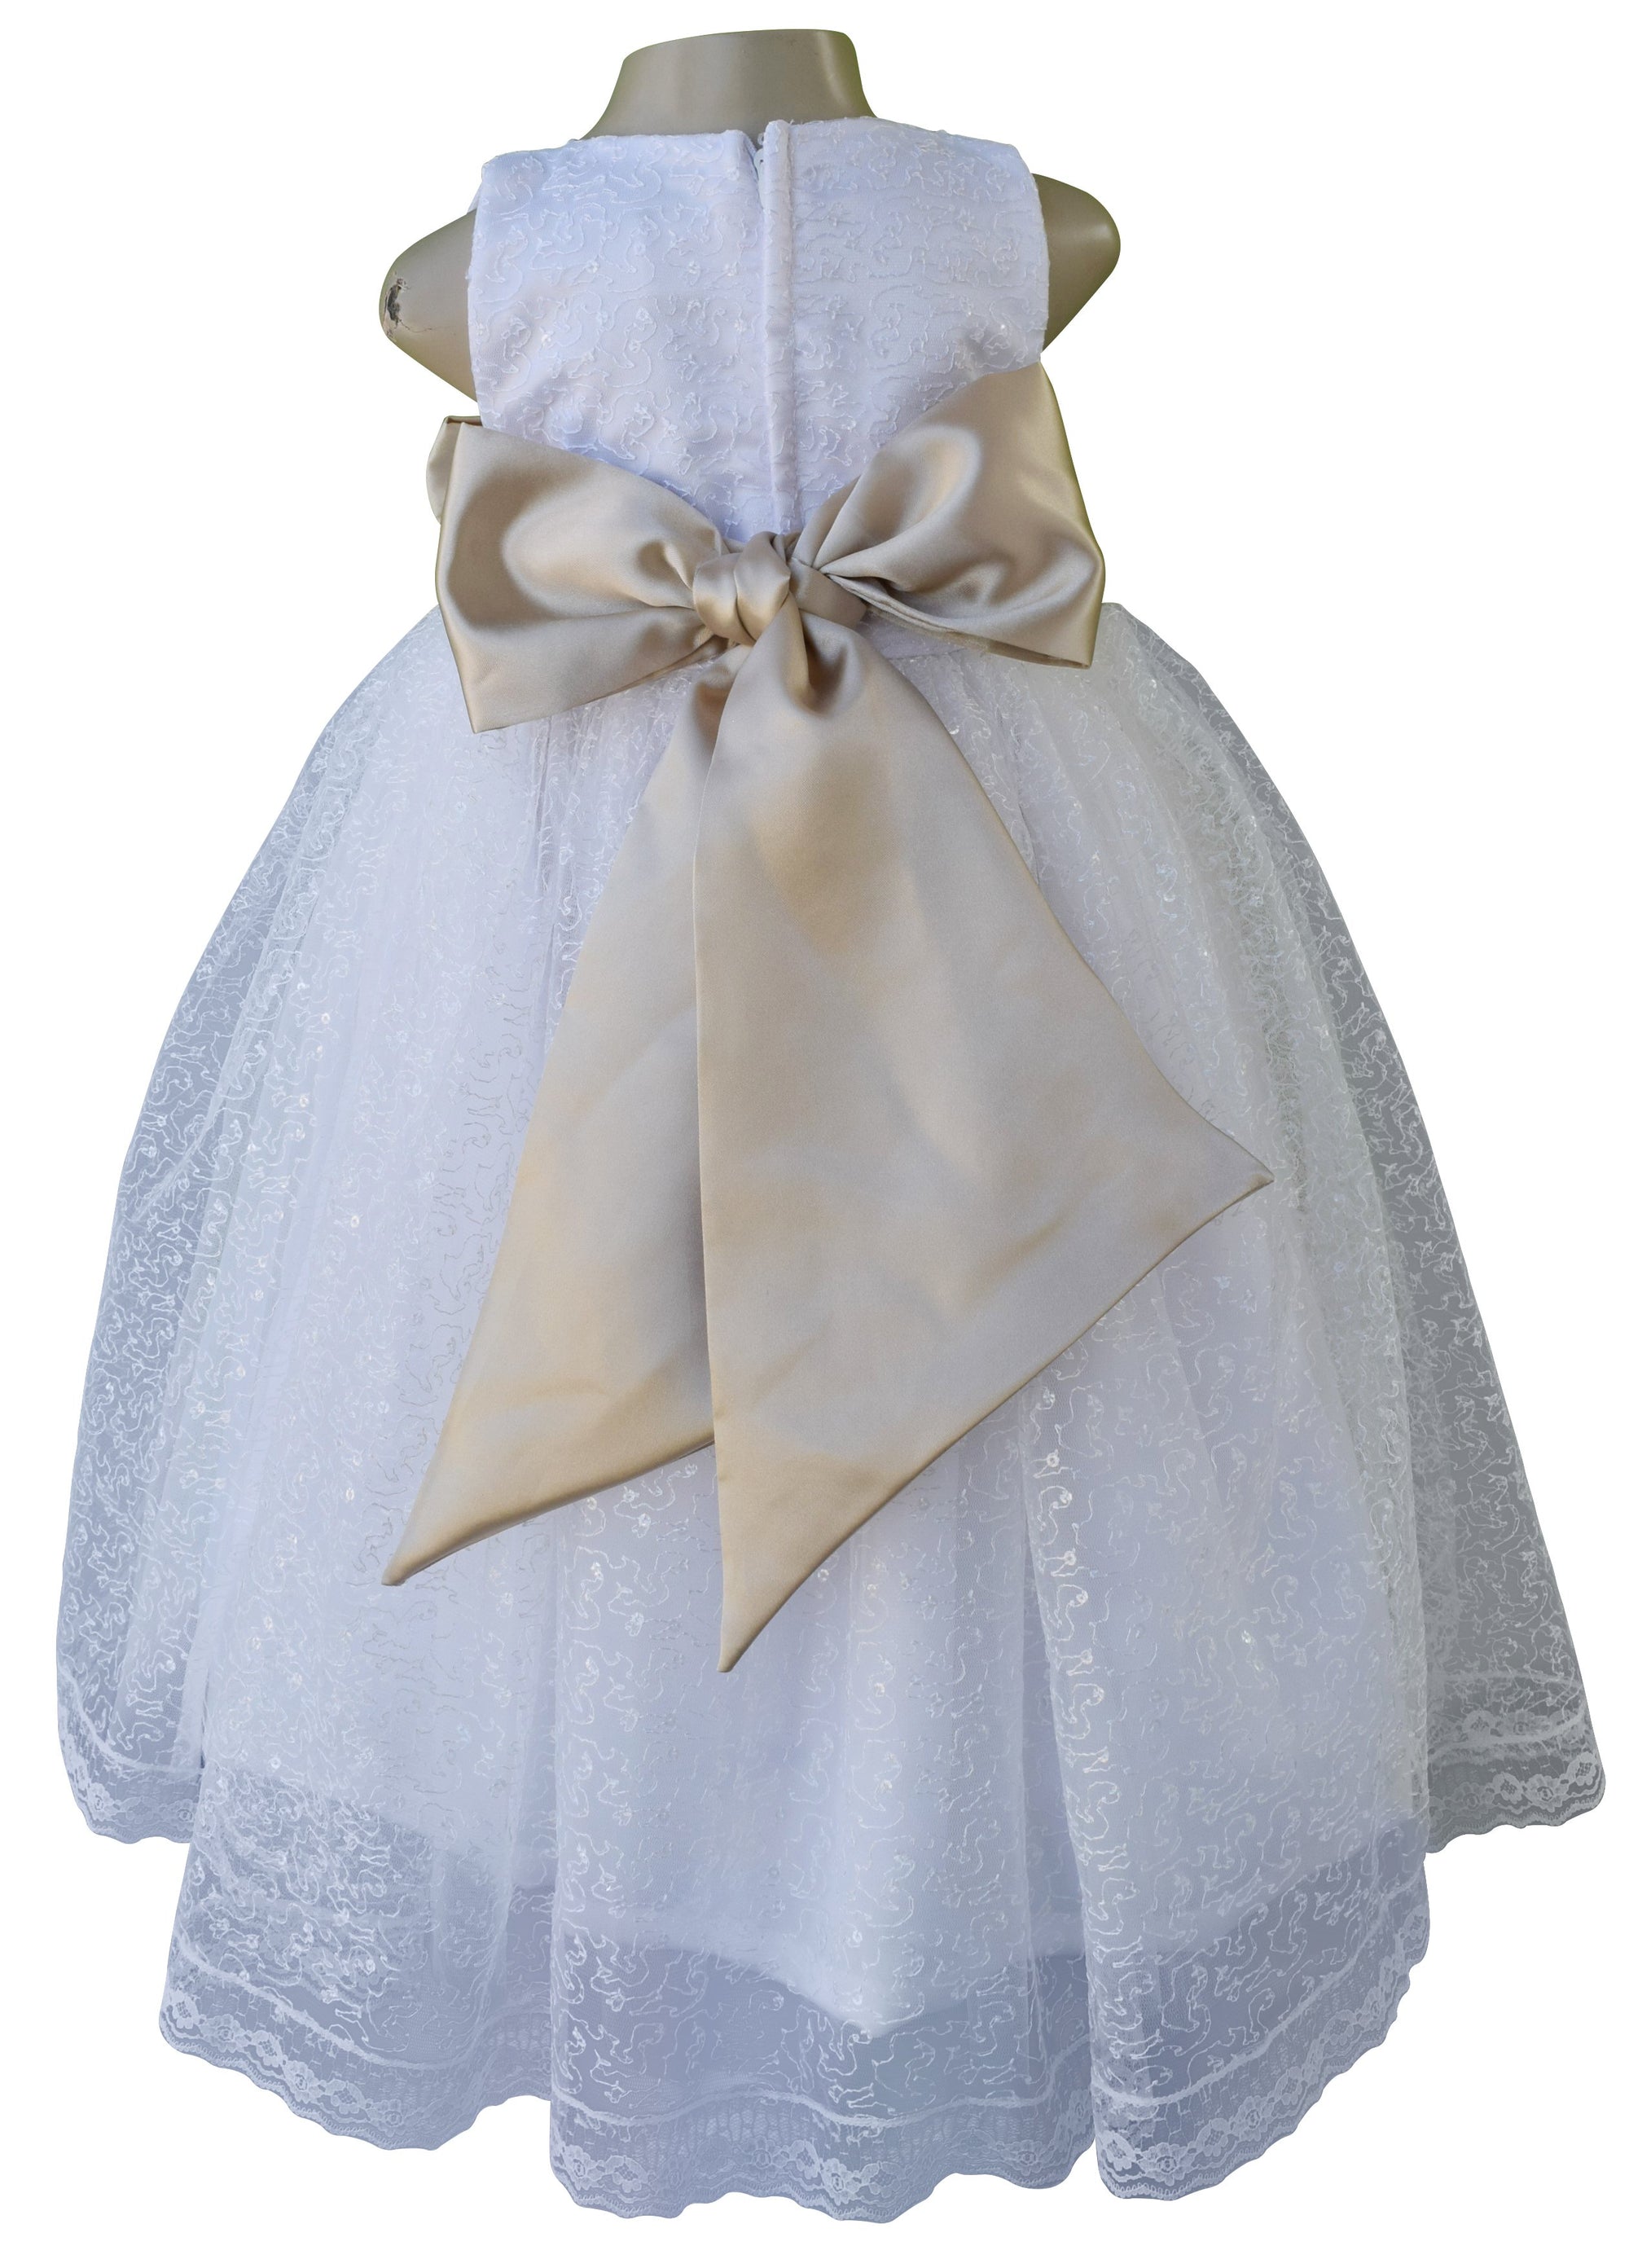 Faye White Embroidered Gown with Champagne Bow & Sash